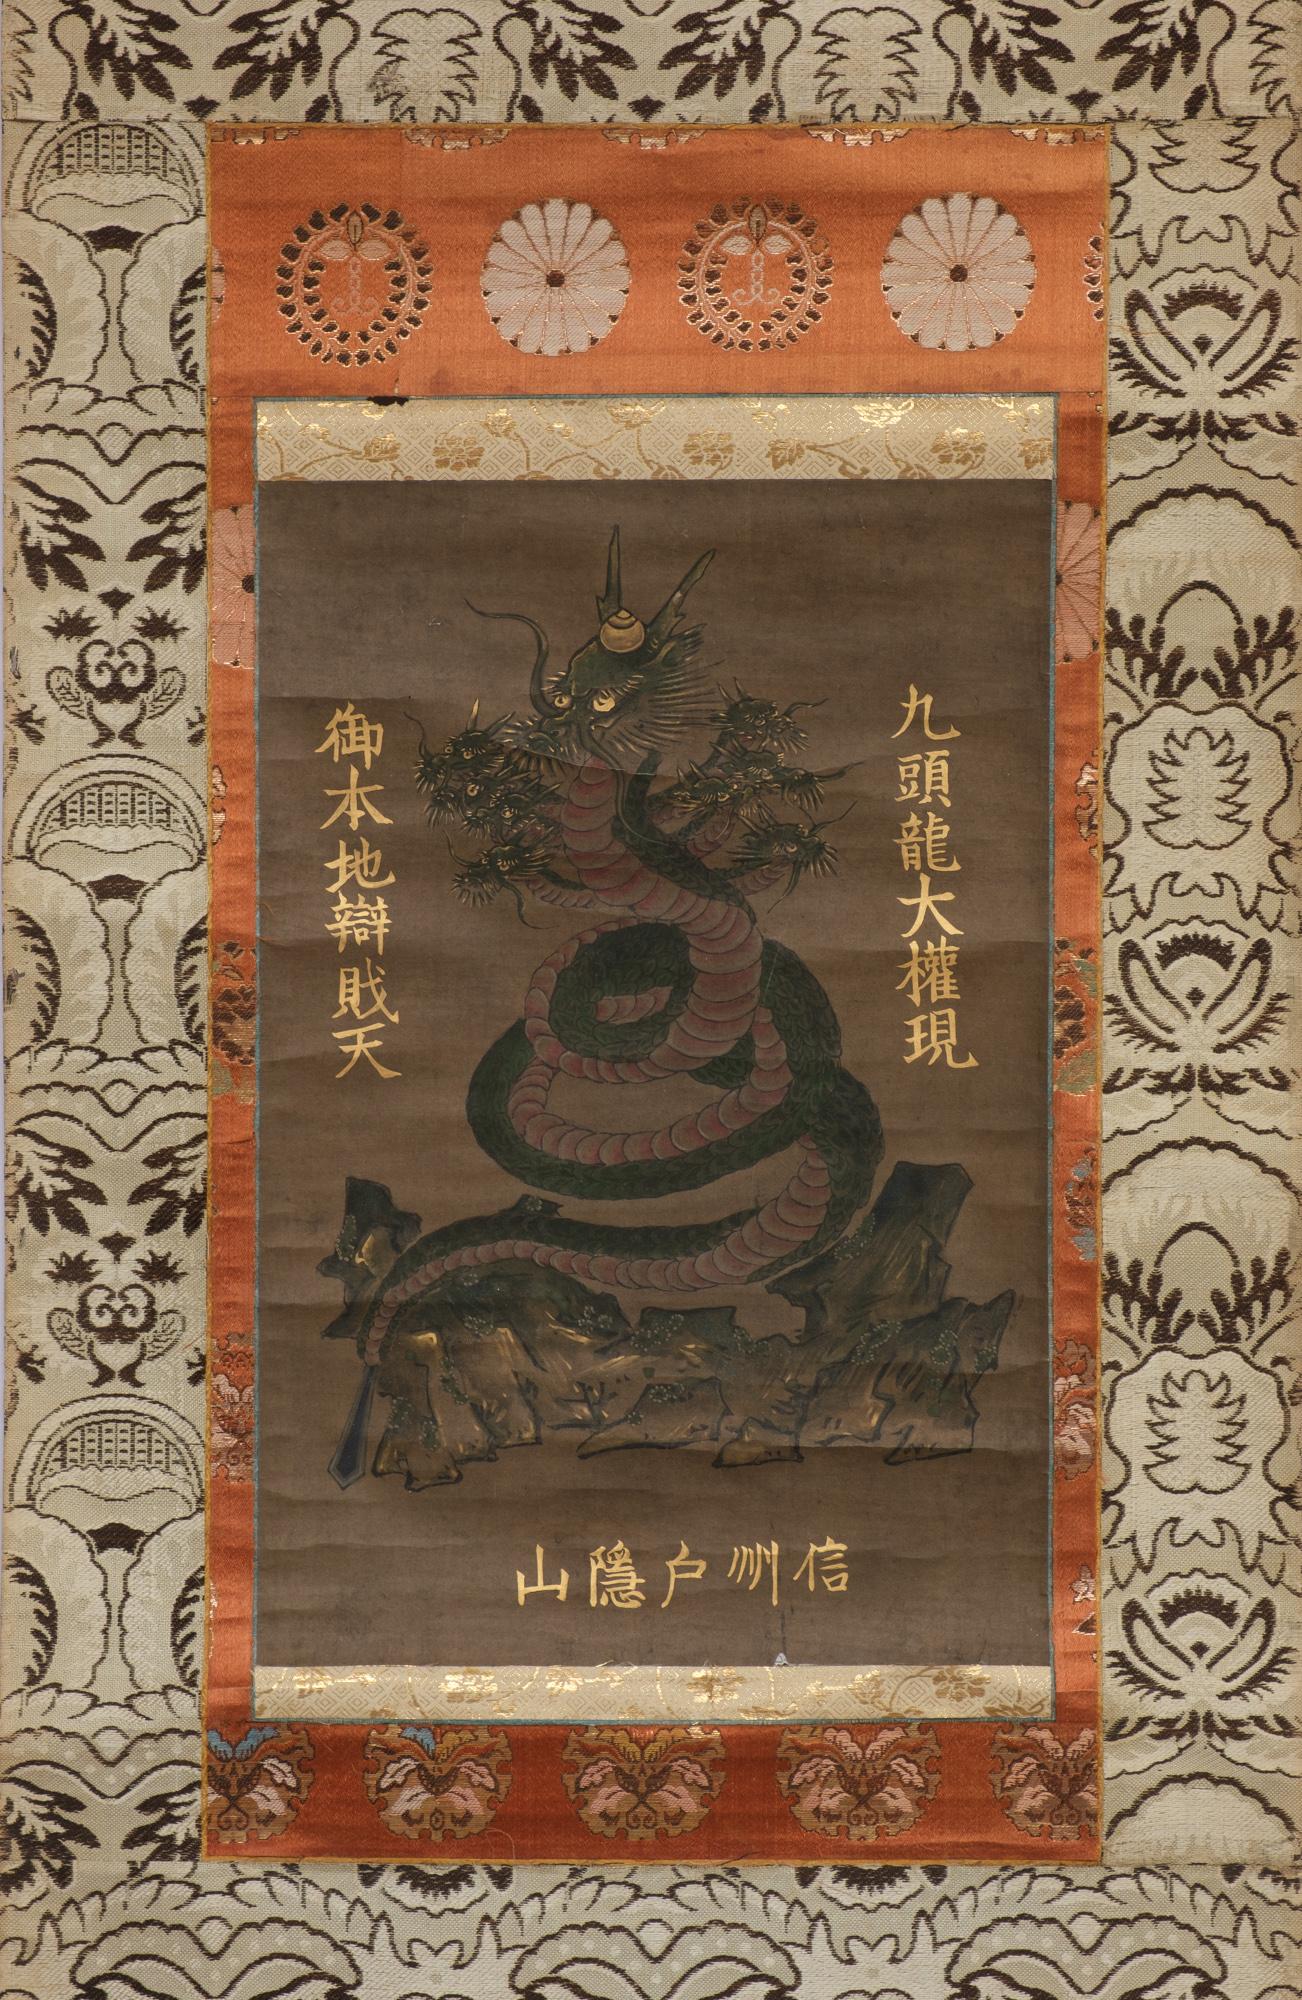 Amazing 260 year old Japanese kakejiku (hanging scroll) with a refined painting of the nine headed dragon deity, with a Buddhist flame as a crown, and a sword as the point of its tail.

It represents the great manifestation of Buddha as the